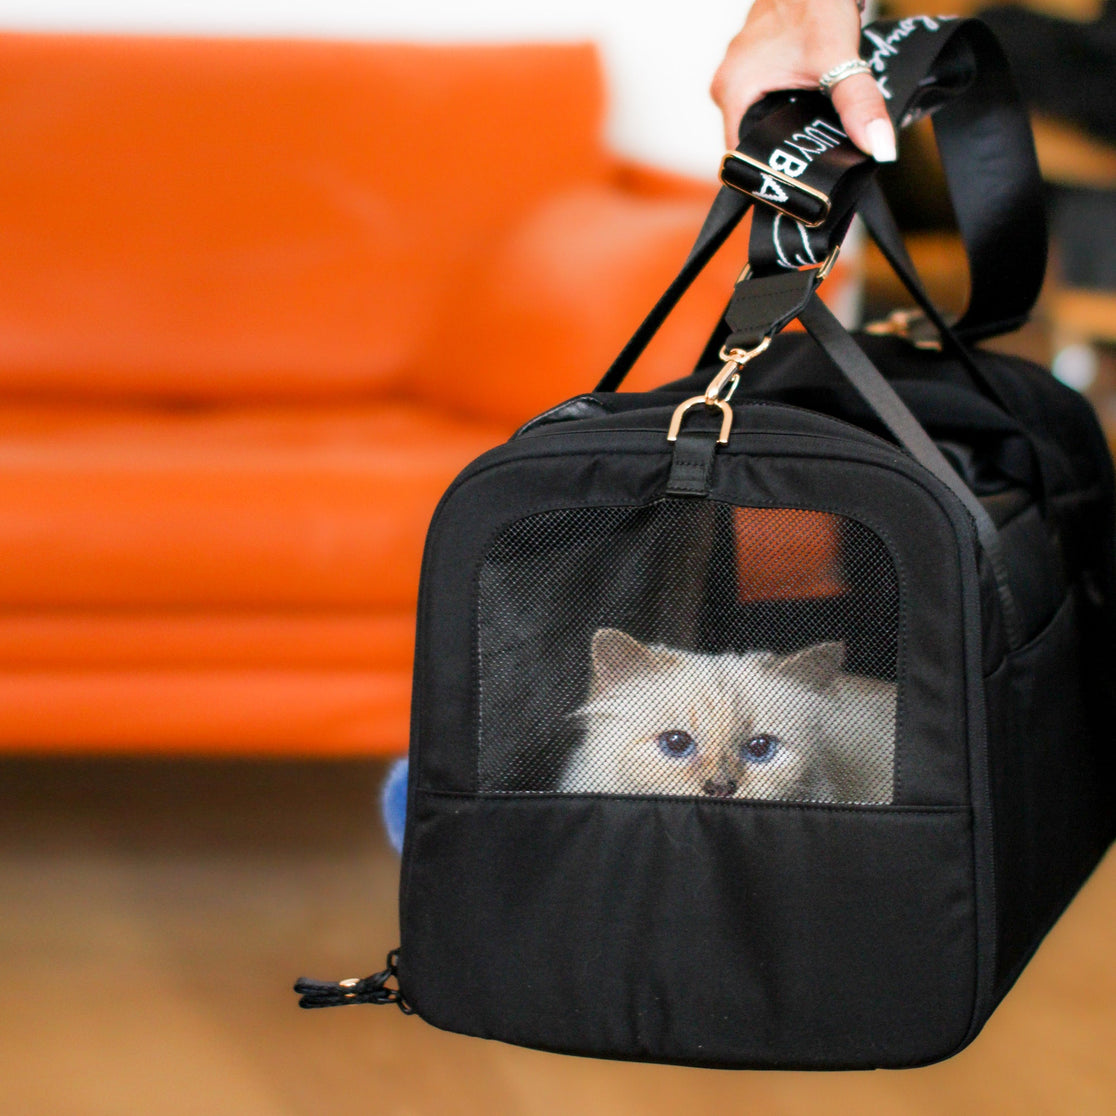 Choupette Lagerfeld in bag